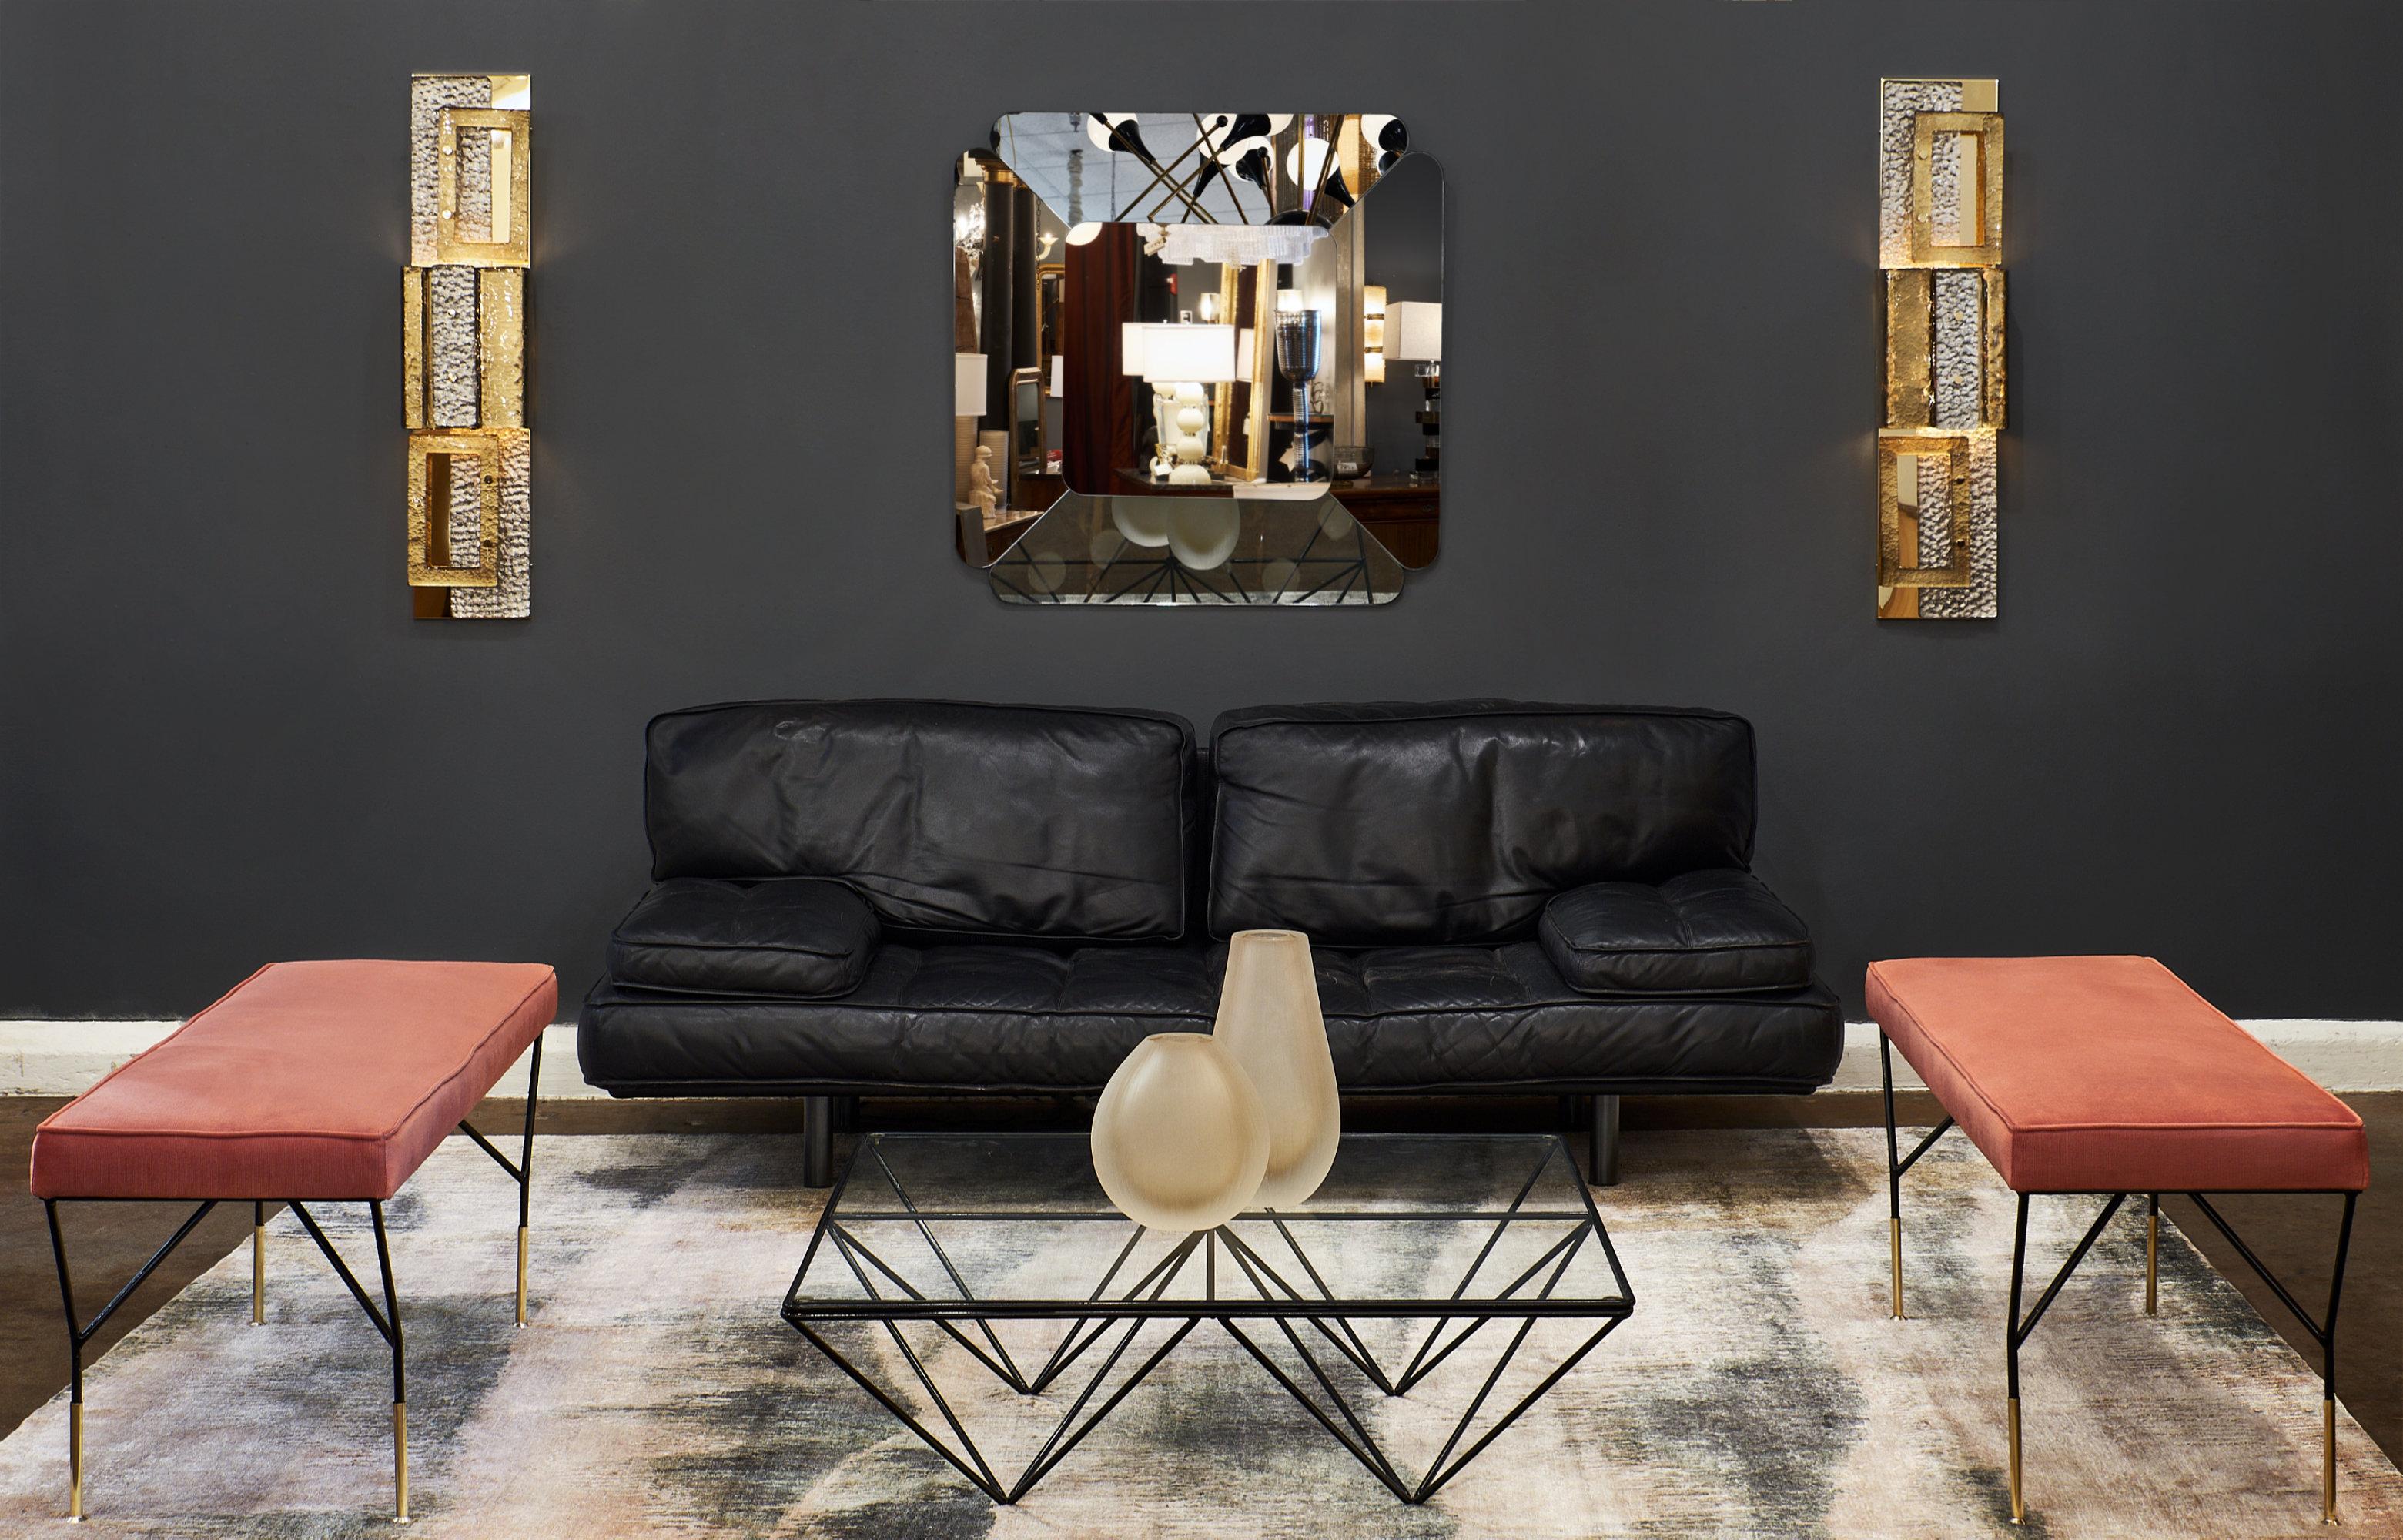 Midcentury Italian “quadrifoglia” multifaceted mirror with four-mirror sections framing the central mirror. We love this important and rare piece.